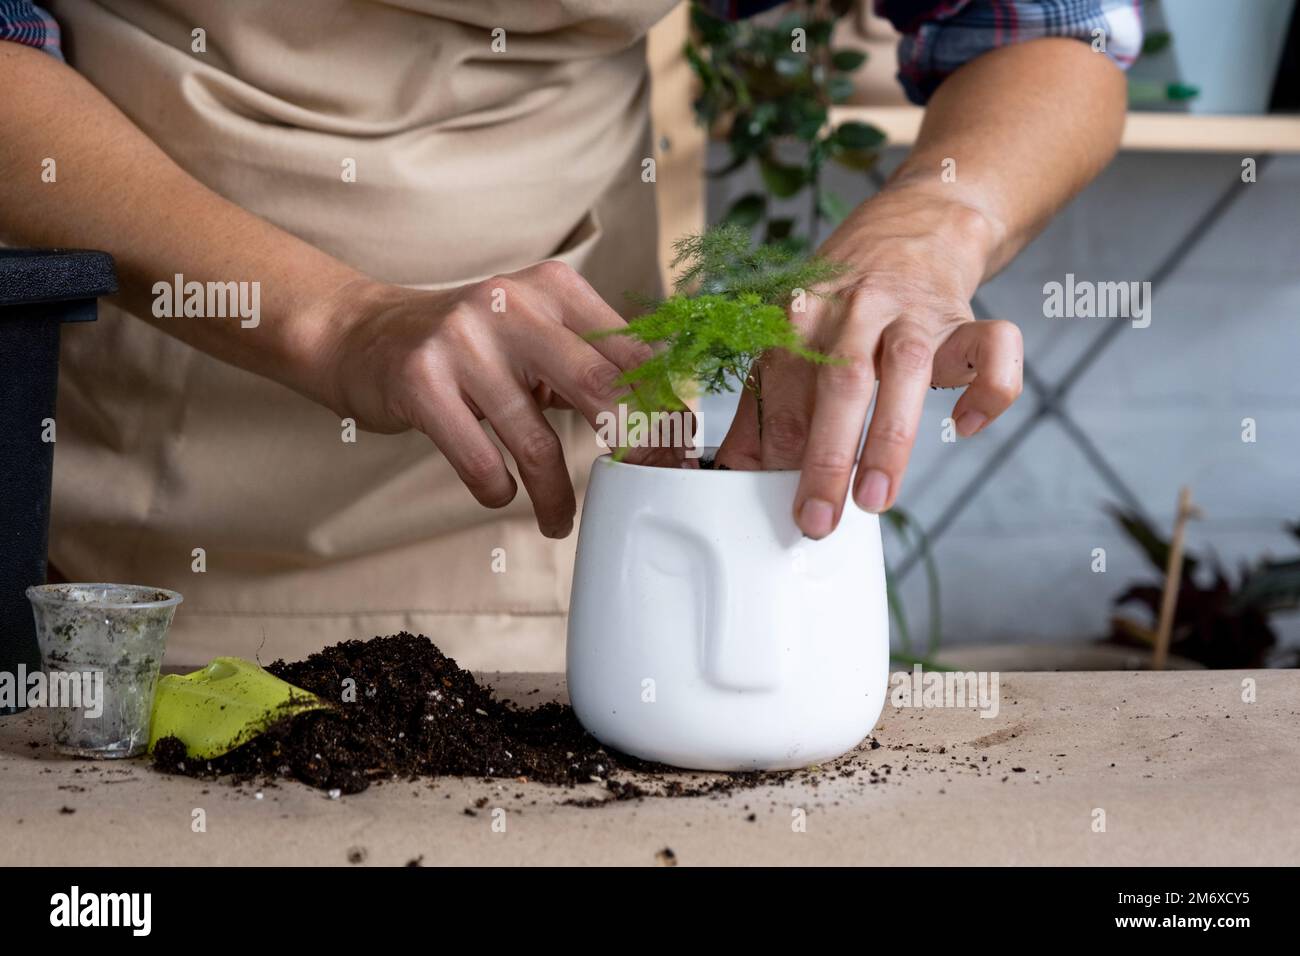 Transplanting a home plant asparagus into a pot with a face. A woman plants a stalk with roots in a new soil. Caring for a potte Stock Photo